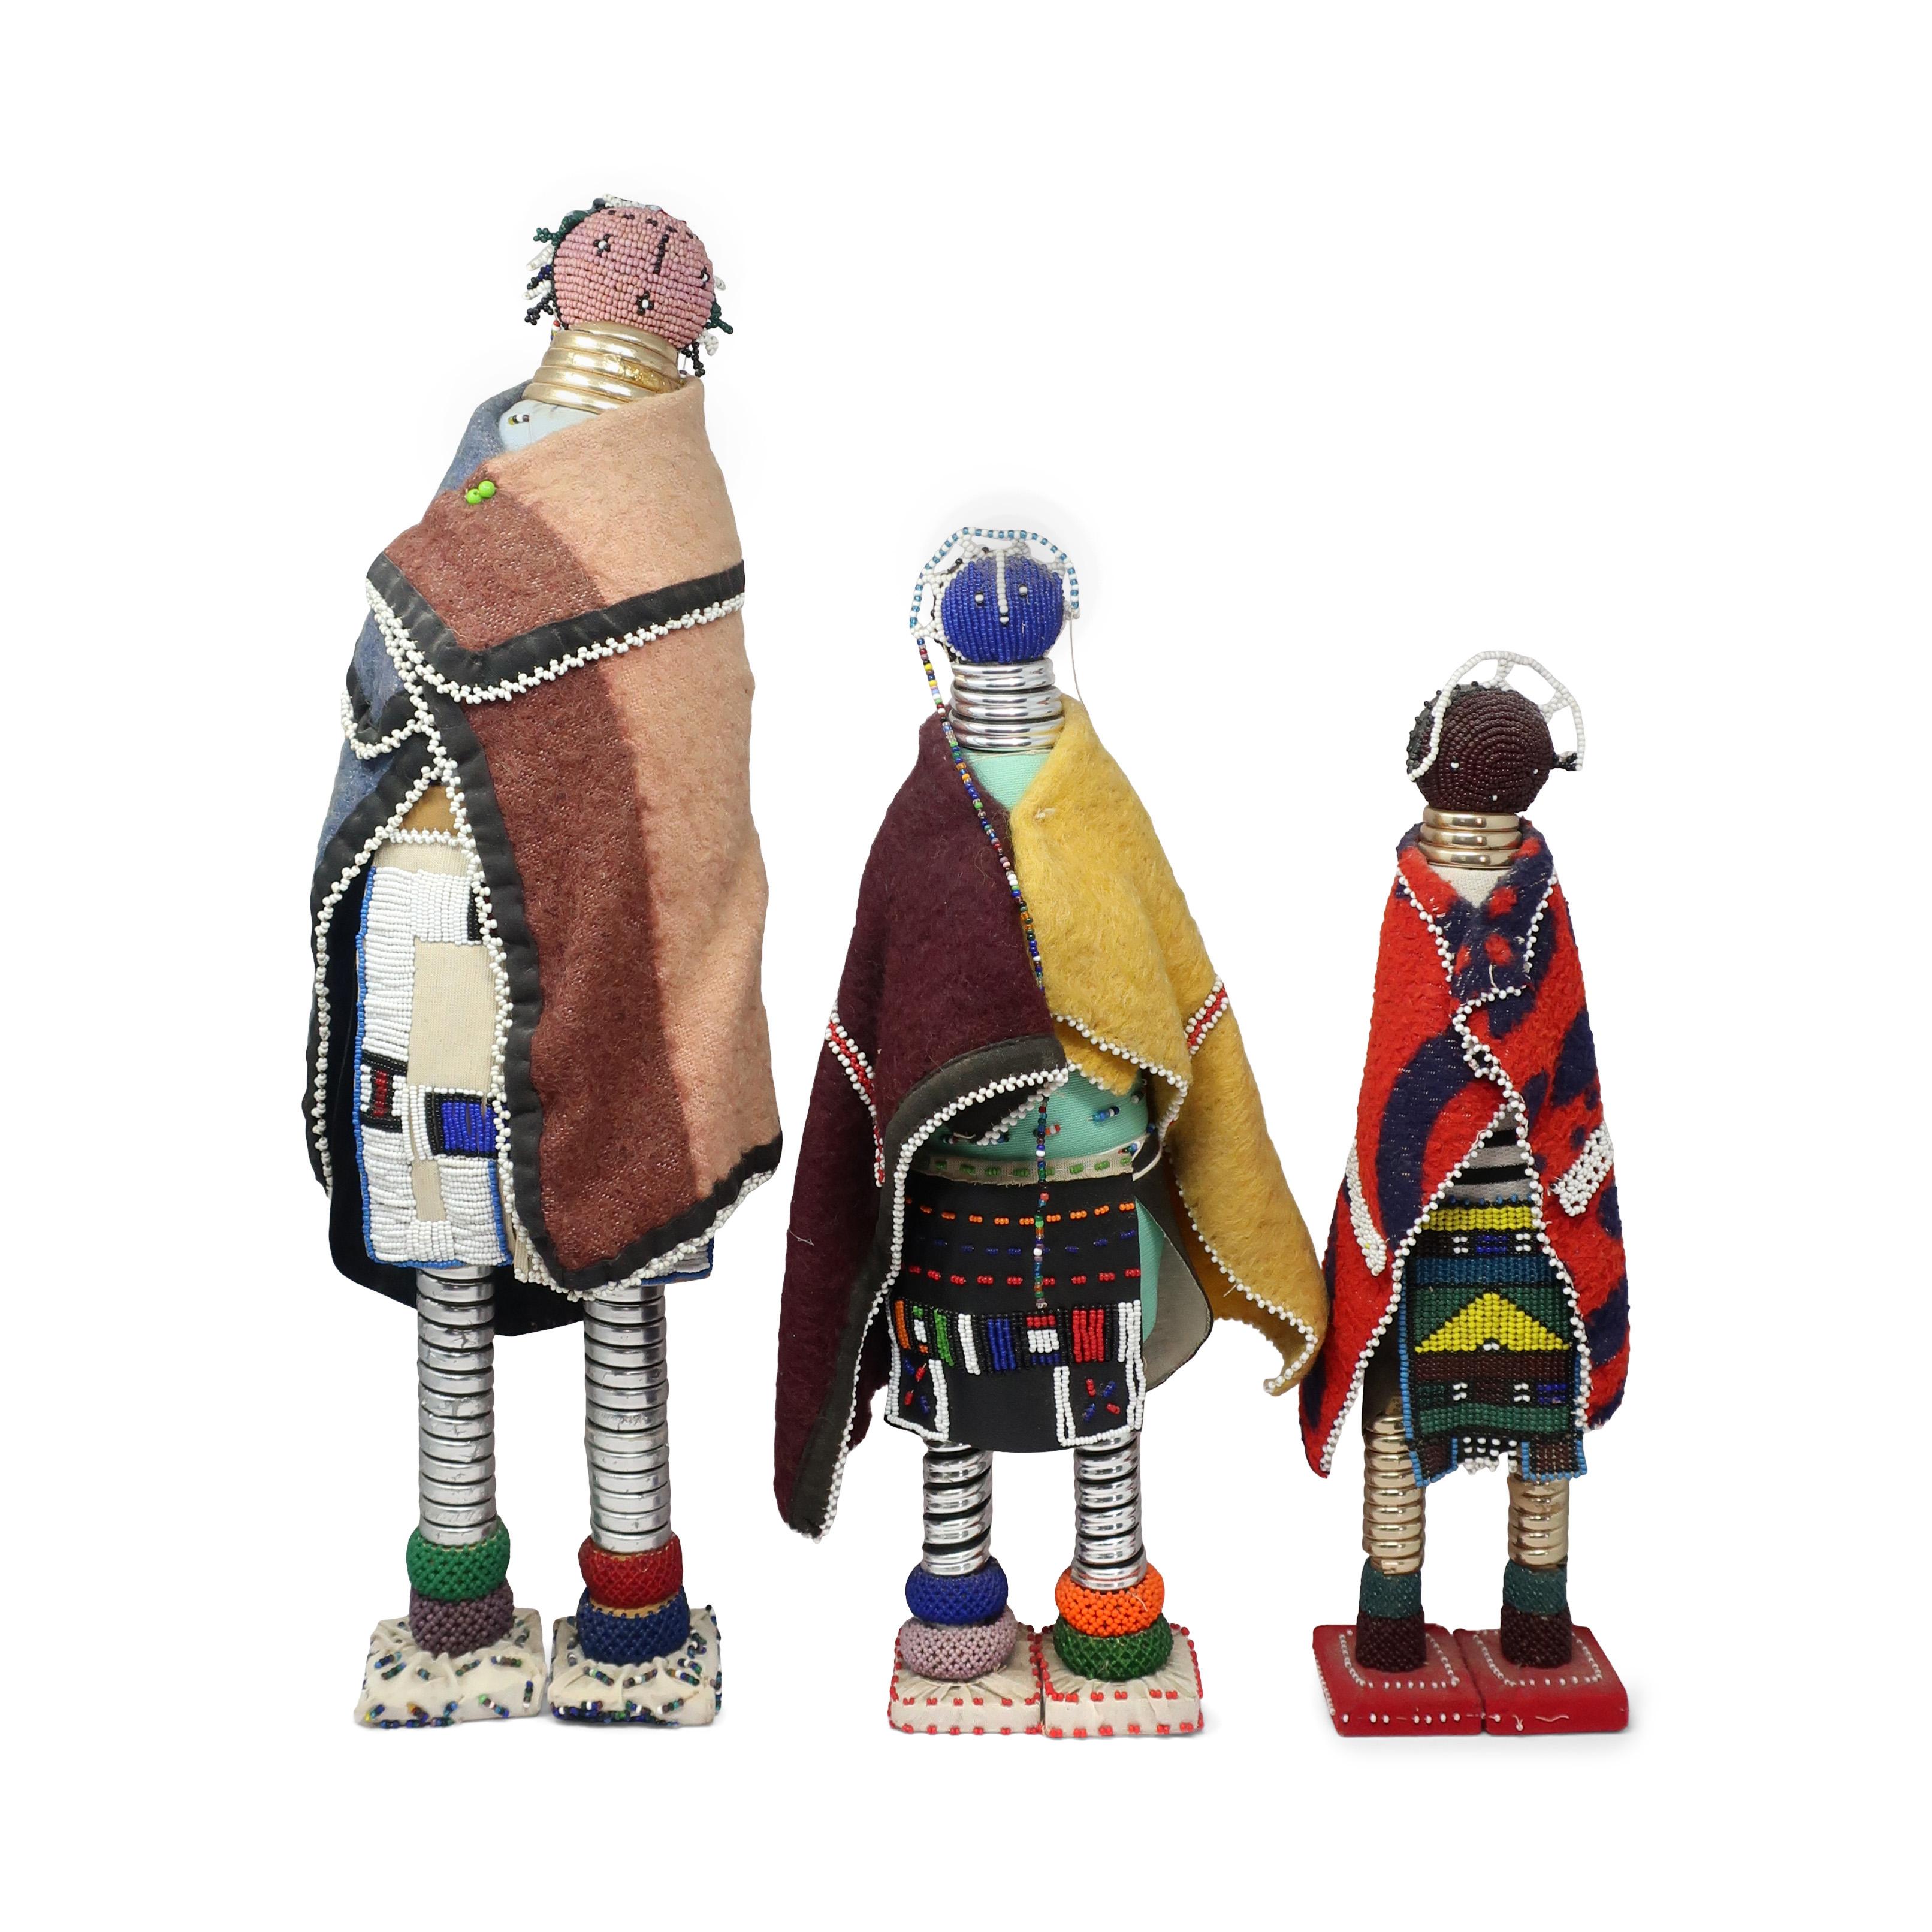 Traditionally made by Ndebele, Zulu and other southern African tribes,  these beautiful beaded dolls are used to encourage fertility and instruct girls at time of their initiation into womanhood.  A set of three.  In good vintage condition with wear